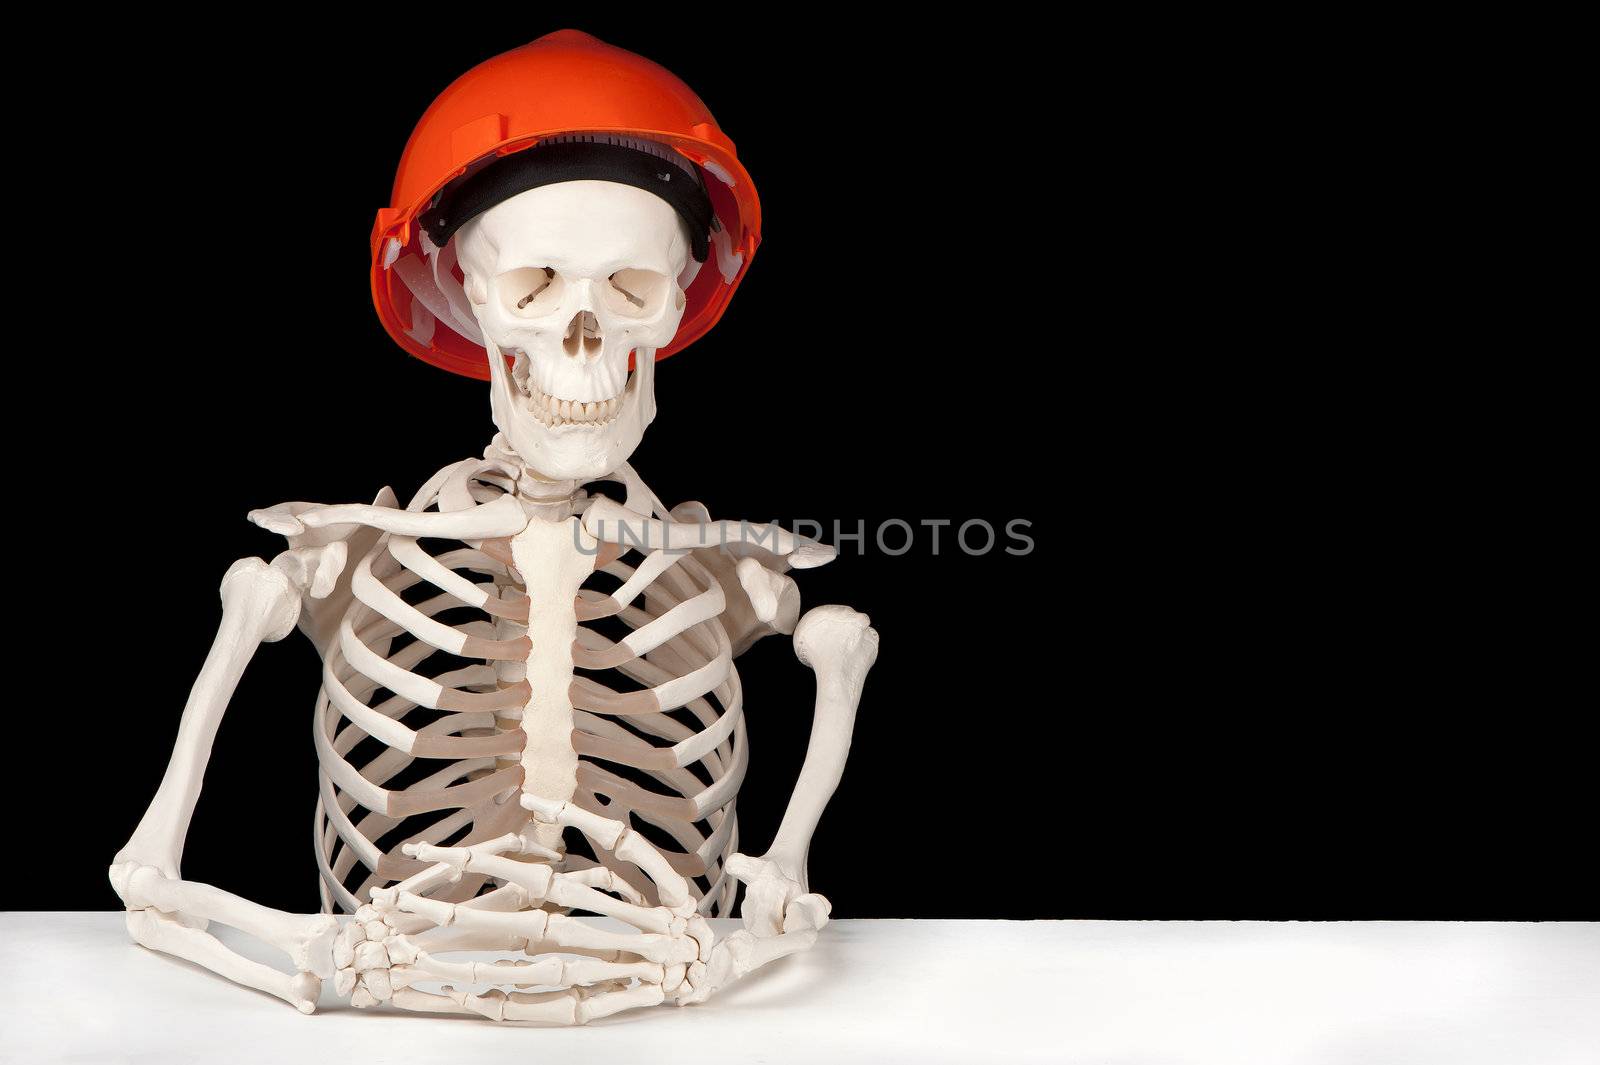 A skeleton with hard hat symbolizes death to the building industry.